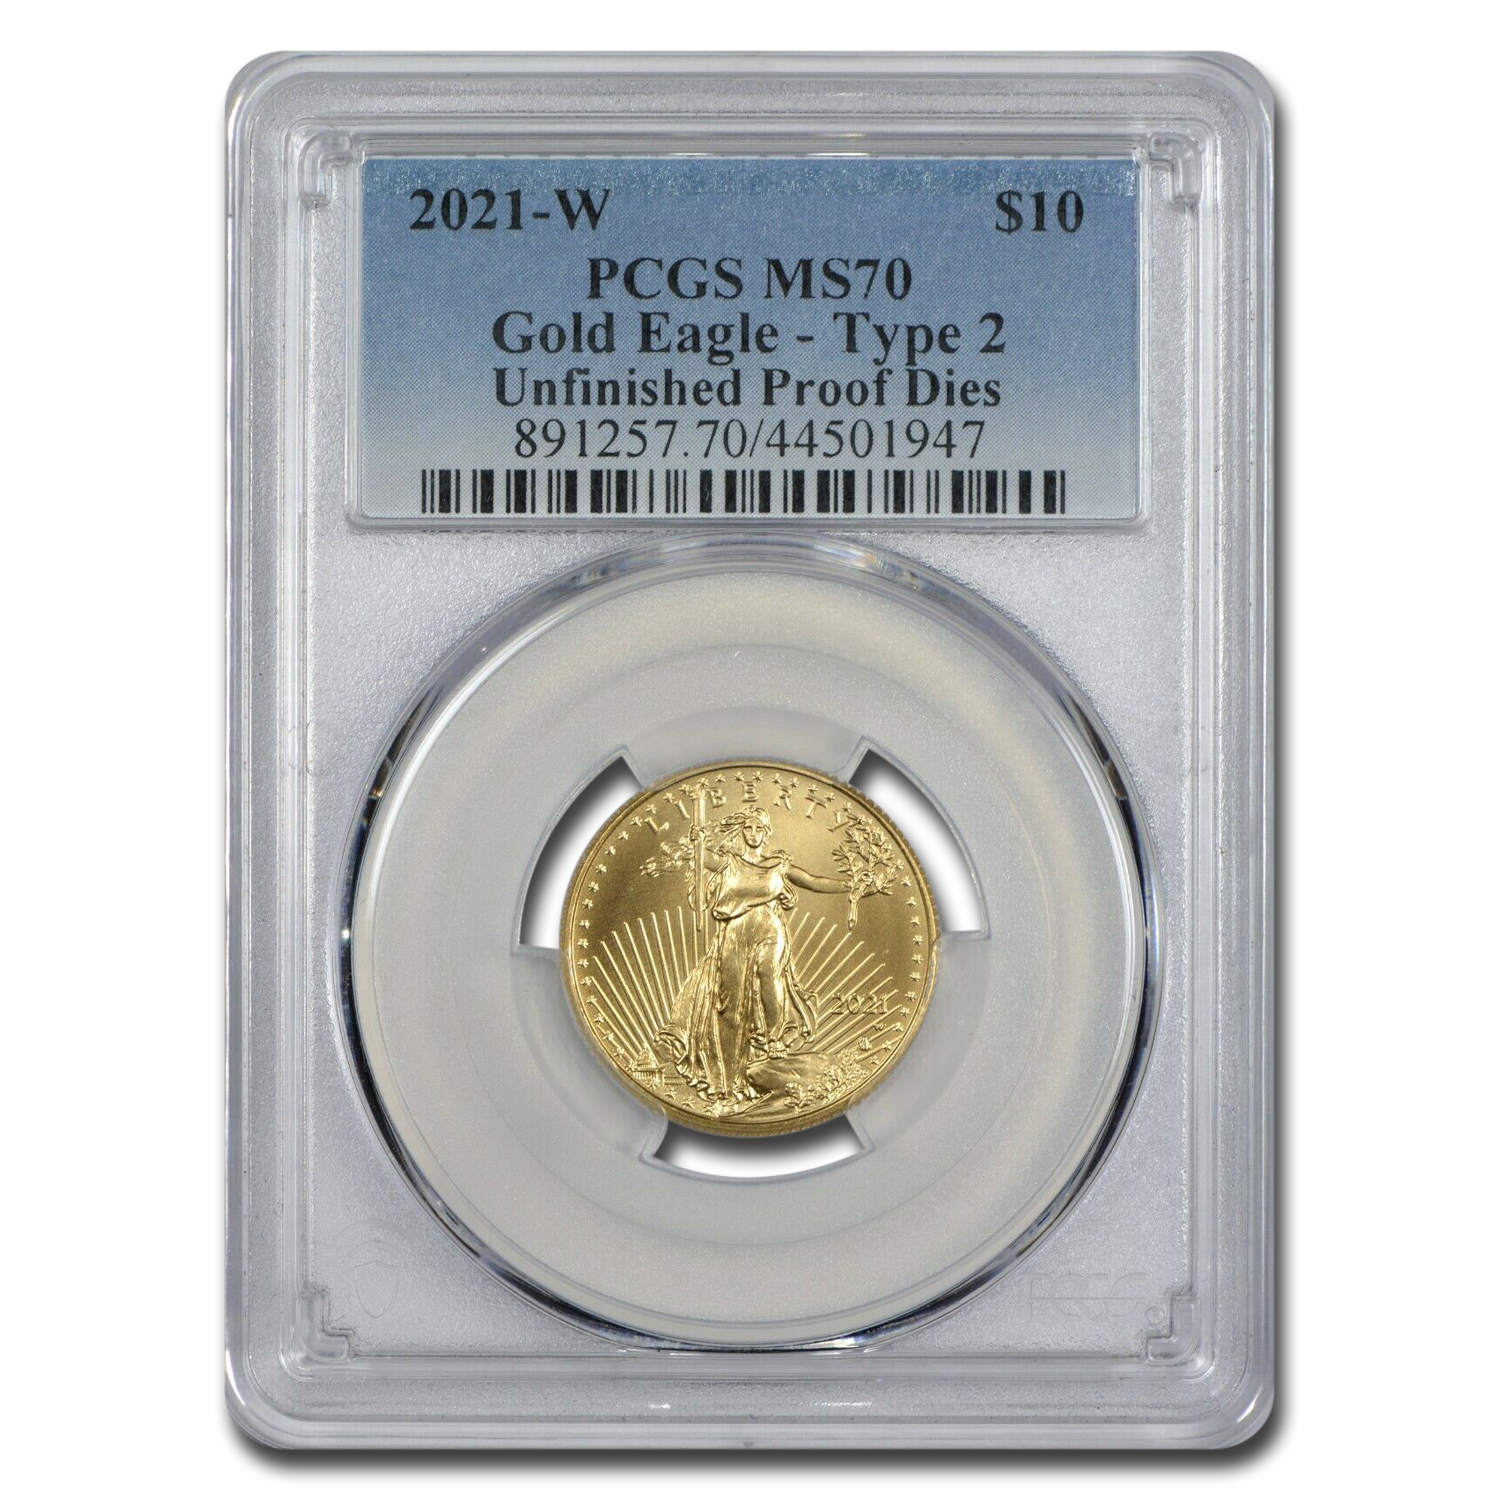 Buy 2021-W 1/4 oz Gold Eagle MS-70 PCGS (Unfinished Proof Dies)